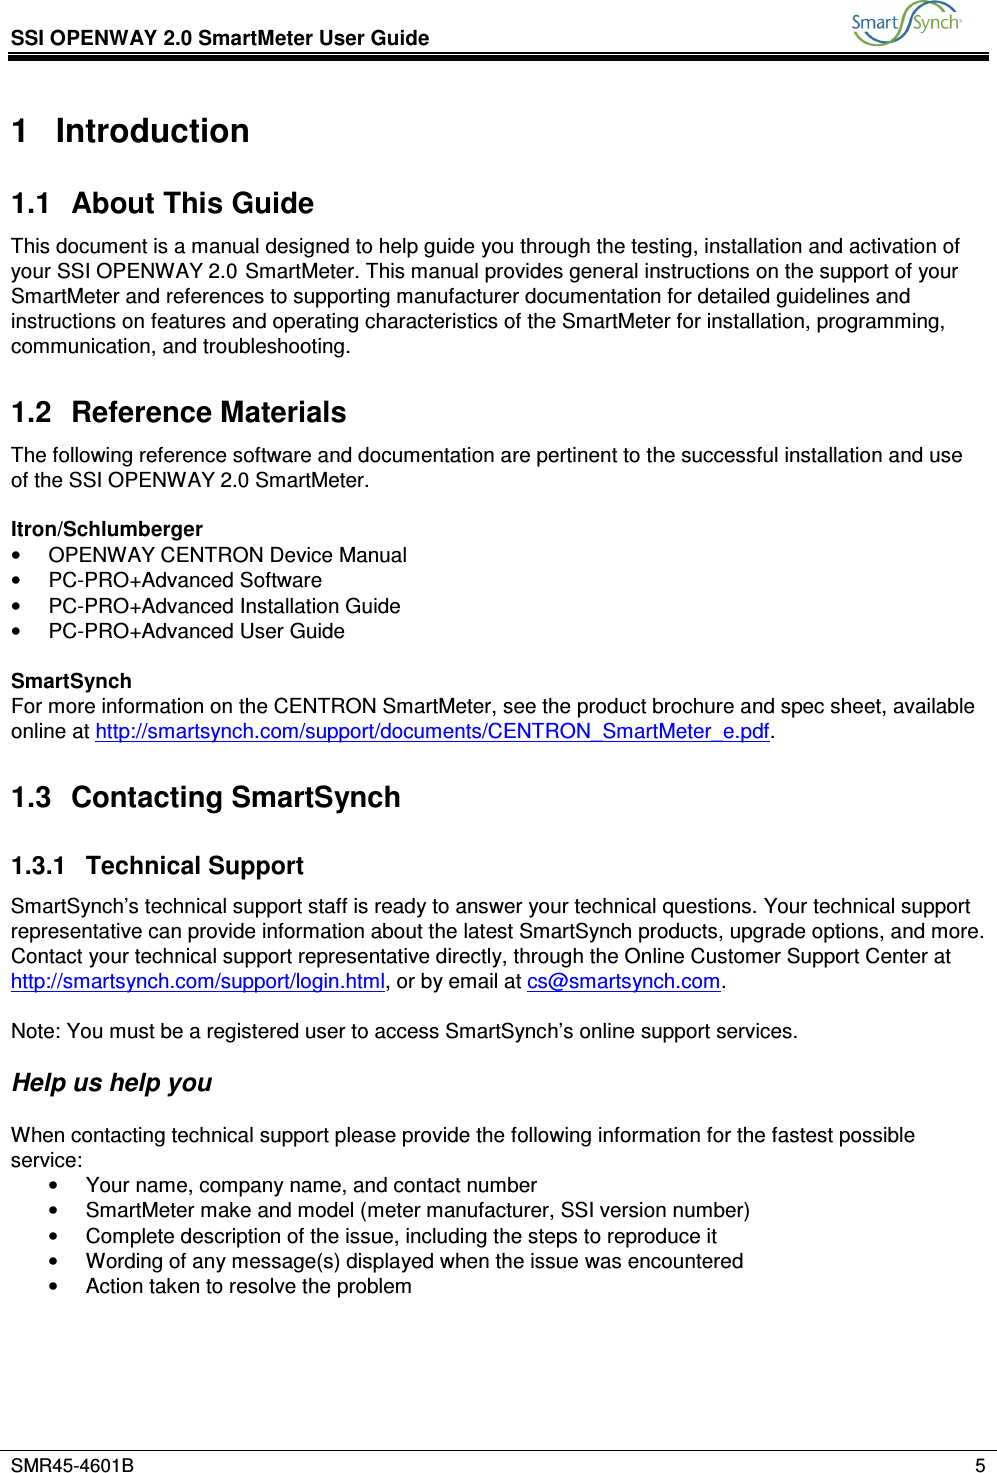 SSI OPENWAY 2.0 SmartMeter User Guide           SMR45-4601B    5  1  Introduction 1.1  About This Guide This document is a manual designed to help guide you through the testing, installation and activation of your SSI OPENWAY 2.0 SmartMeter. This manual provides general instructions on the support of your SmartMeter and references to supporting manufacturer documentation for detailed guidelines and instructions on features and operating characteristics of the SmartMeter for installation, programming, communication, and troubleshooting. 1.2  Reference Materials The following reference software and documentation are pertinent to the successful installation and use of the SSI OPENWAY 2.0 SmartMeter.   Itron/Schlumberger •  OPENWAY CENTRON Device Manual •  PC-PRO+Advanced Software •  PC-PRO+Advanced Installation Guide •  PC-PRO+Advanced User Guide  SmartSynch For more information on the CENTRON SmartMeter, see the product brochure and spec sheet, available online at http://smartsynch.com/support/documents/CENTRON_SmartMeter_e.pdf. 1.3  Contacting SmartSynch 1.3.1  Technical Support SmartSynch’s technical support staff is ready to answer your technical questions. Your technical support representative can provide information about the latest SmartSynch products, upgrade options, and more. Contact your technical support representative directly, through the Online Customer Support Center at http://smartsynch.com/support/login.html, or by email at cs@smartsynch.com.  Note: You must be a registered user to access SmartSynch’s online support services.   Help us help you  When contacting technical support please provide the following information for the fastest possible service: •  Your name, company name, and contact number •  SmartMeter make and model (meter manufacturer, SSI version number) •  Complete description of the issue, including the steps to reproduce it •  Wording of any message(s) displayed when the issue was encountered •  Action taken to resolve the problem